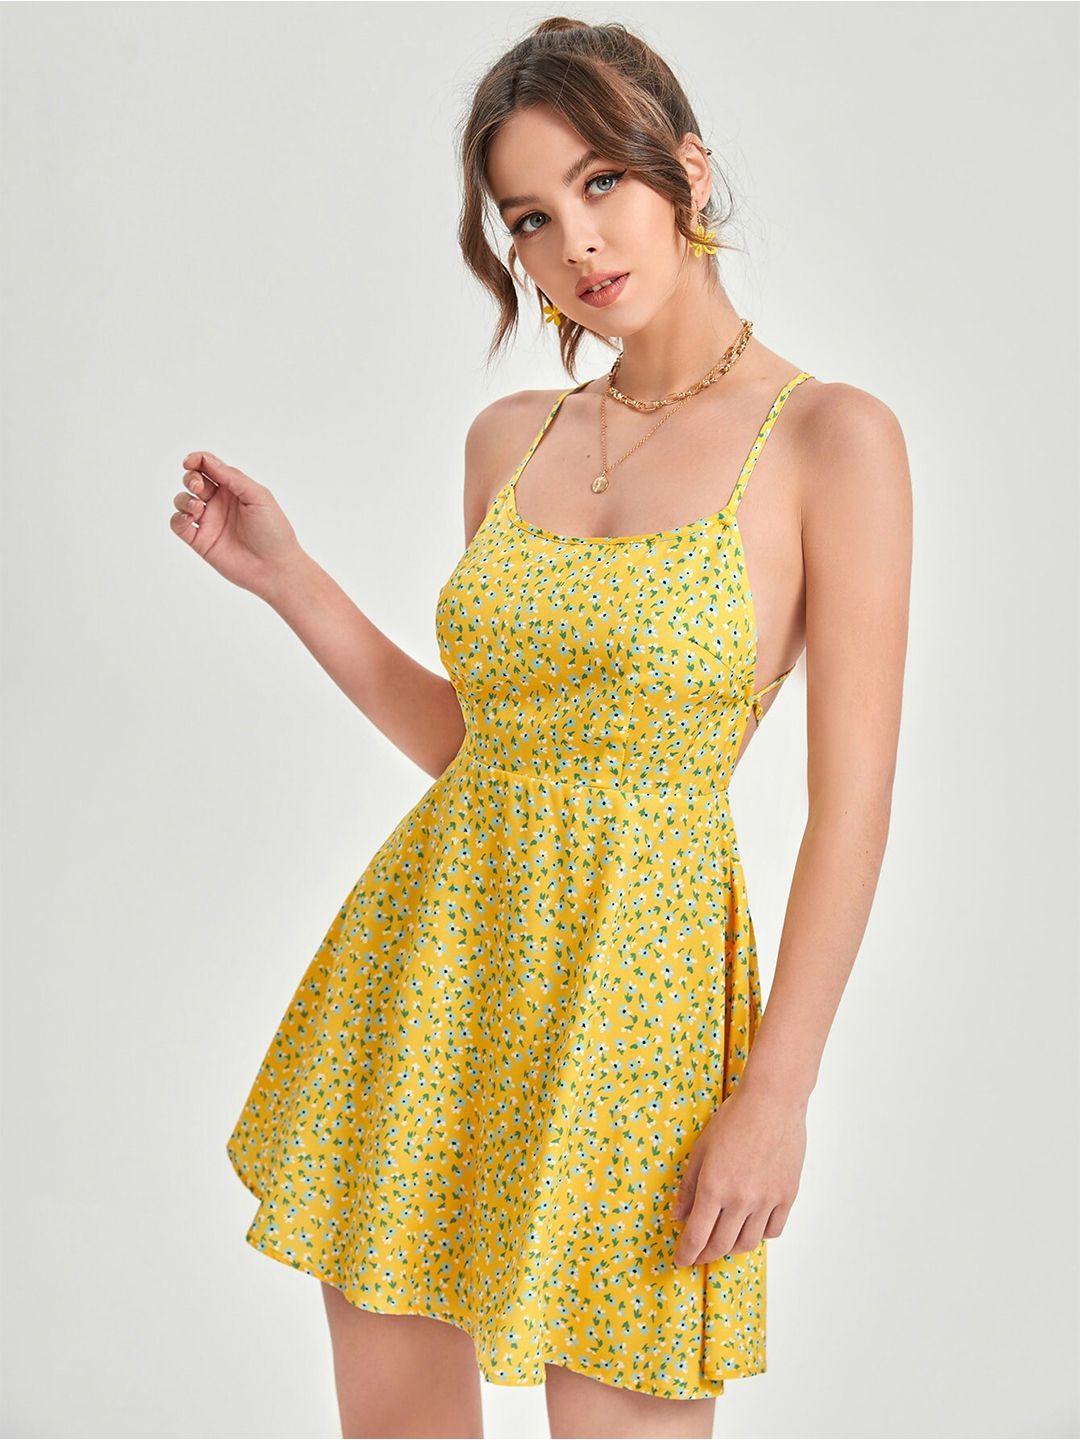 aahwan women yellow floral print backless dress